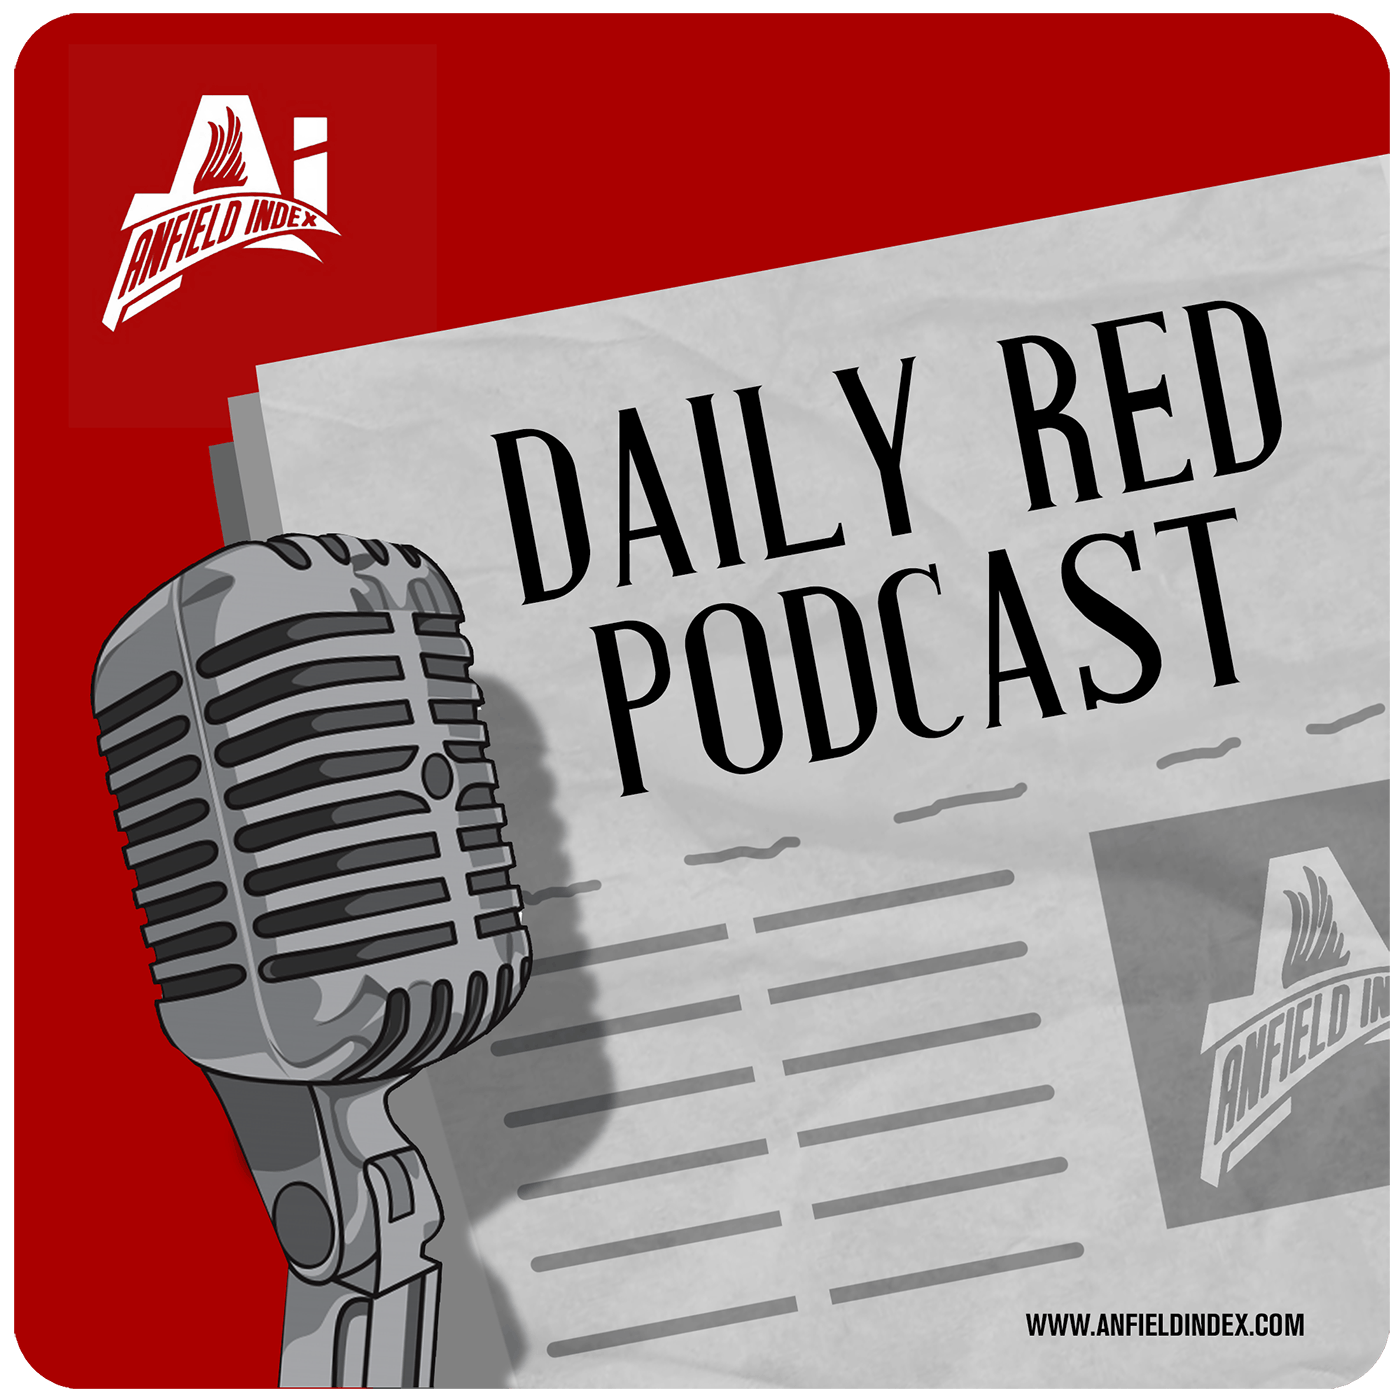 Make It Special - Daily Red Podcast